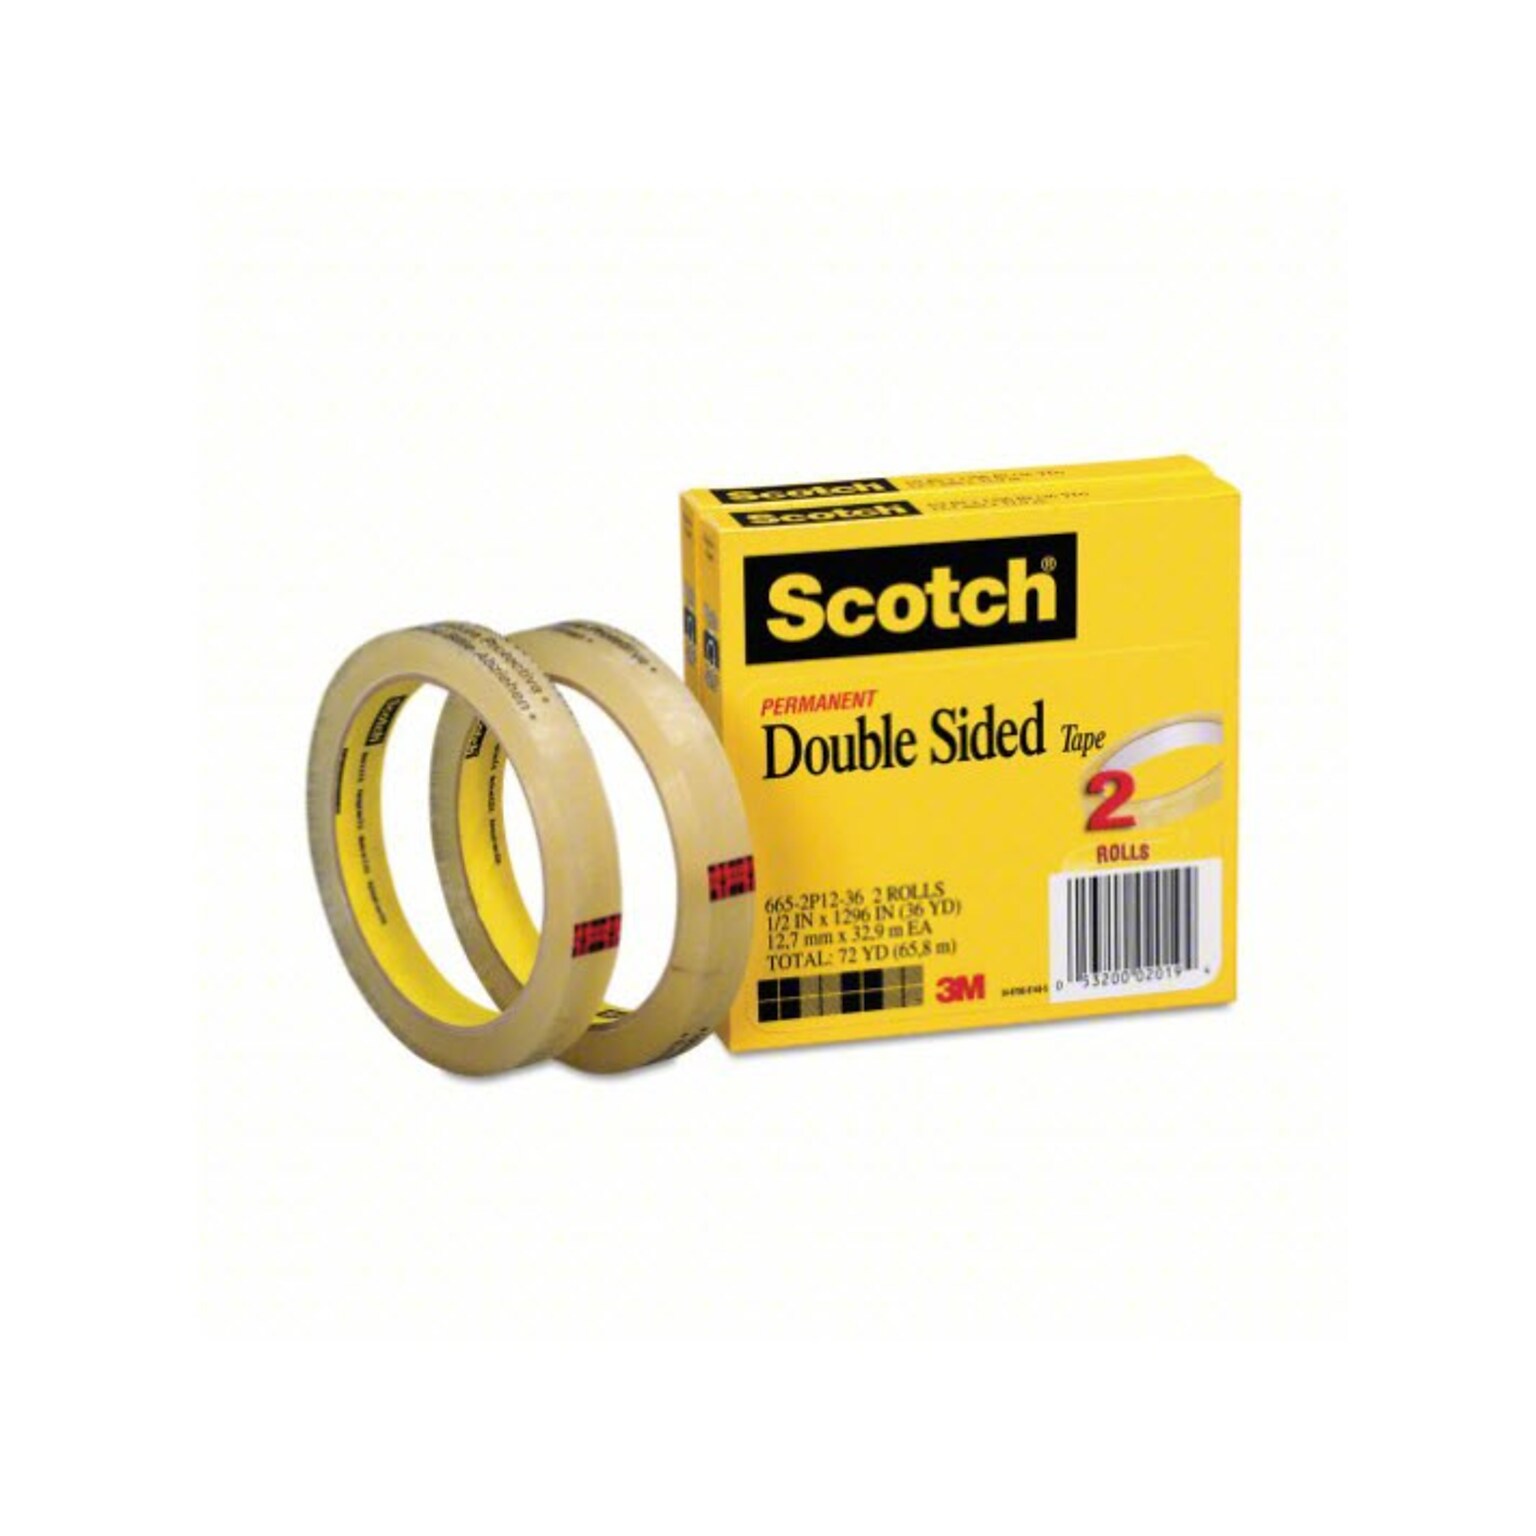 Scotch Permanent Double Sided Tape, 1/2 in x 1296 in, 2 Tape Rolls, Refill, Home Office Supplies and Back to School Supplies